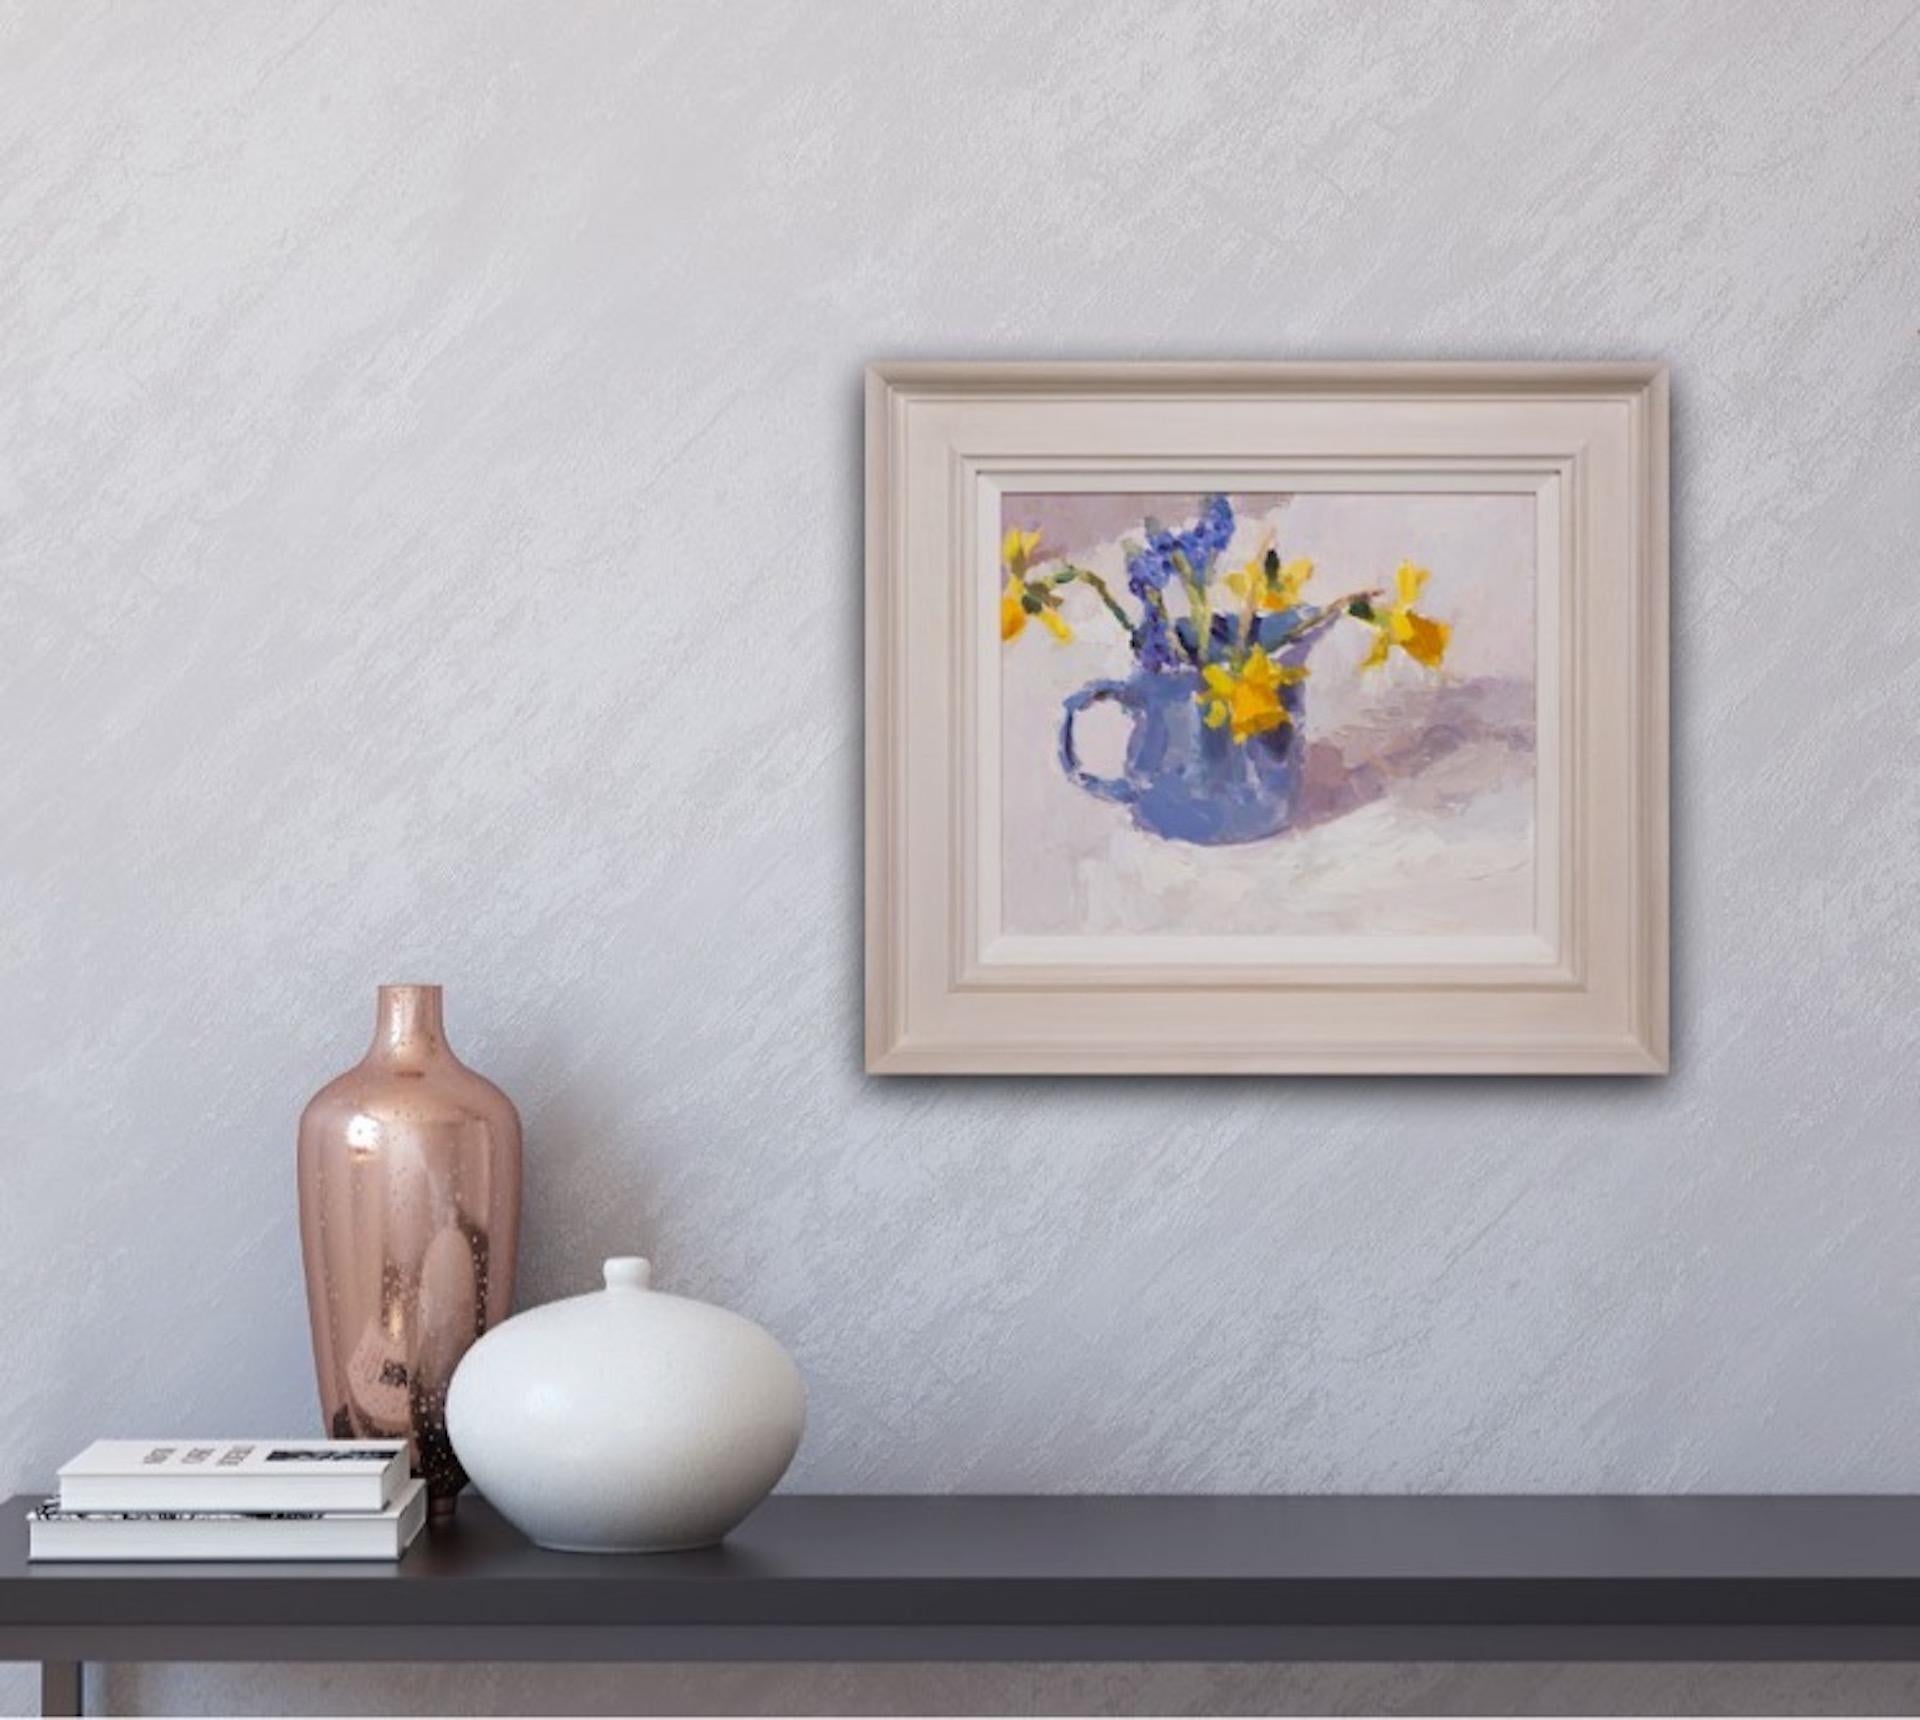 Lynne Cartlidge
Grape Hyacinths and Daffodils in a Blue Jug
Original Still Life Painting
Oil Paint on Board
Image Size: H 25cm x W 30.2cm x D 0.6cm
Framed Size: H 38cm x W 43cm x D 3.3cm
Sold Framed in an Off-White Frame
Please note that insitu